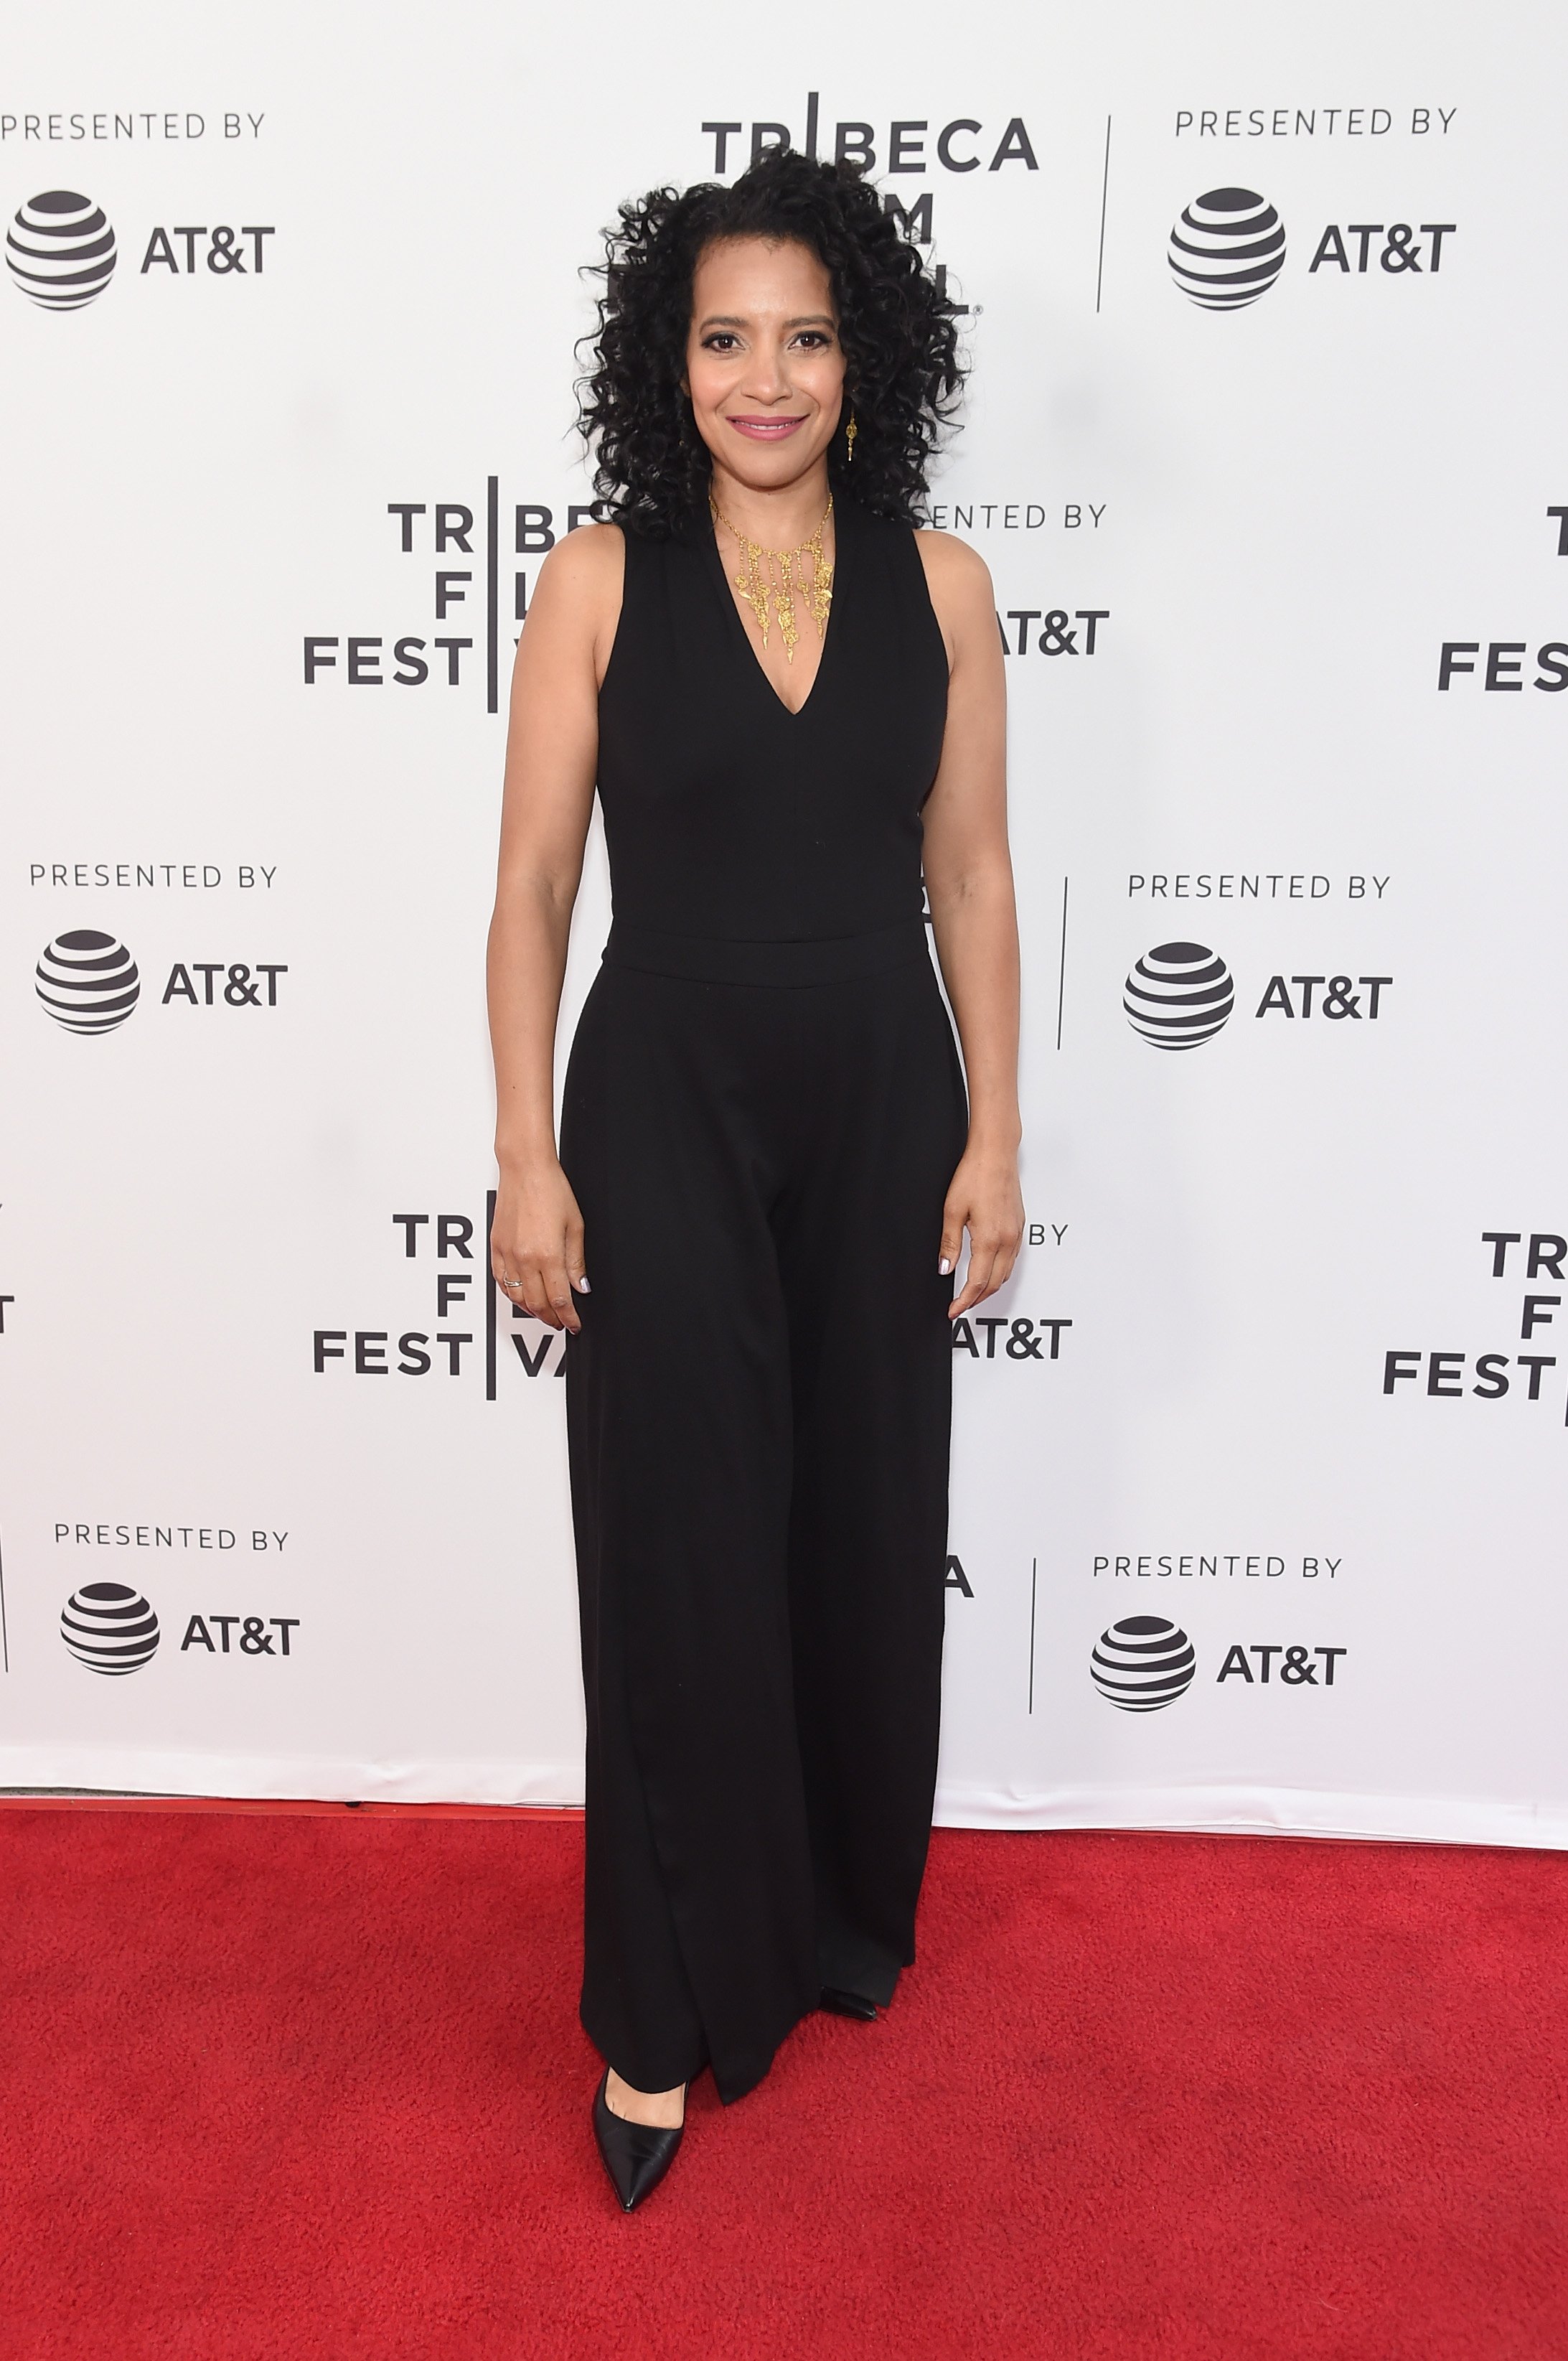 Luna Lauren Velez attends the "Swallow" screening during the 2019 Tribeca Film Festival at SVA Theater on April 28, 2019, in New York City. | Source: Getty Images.